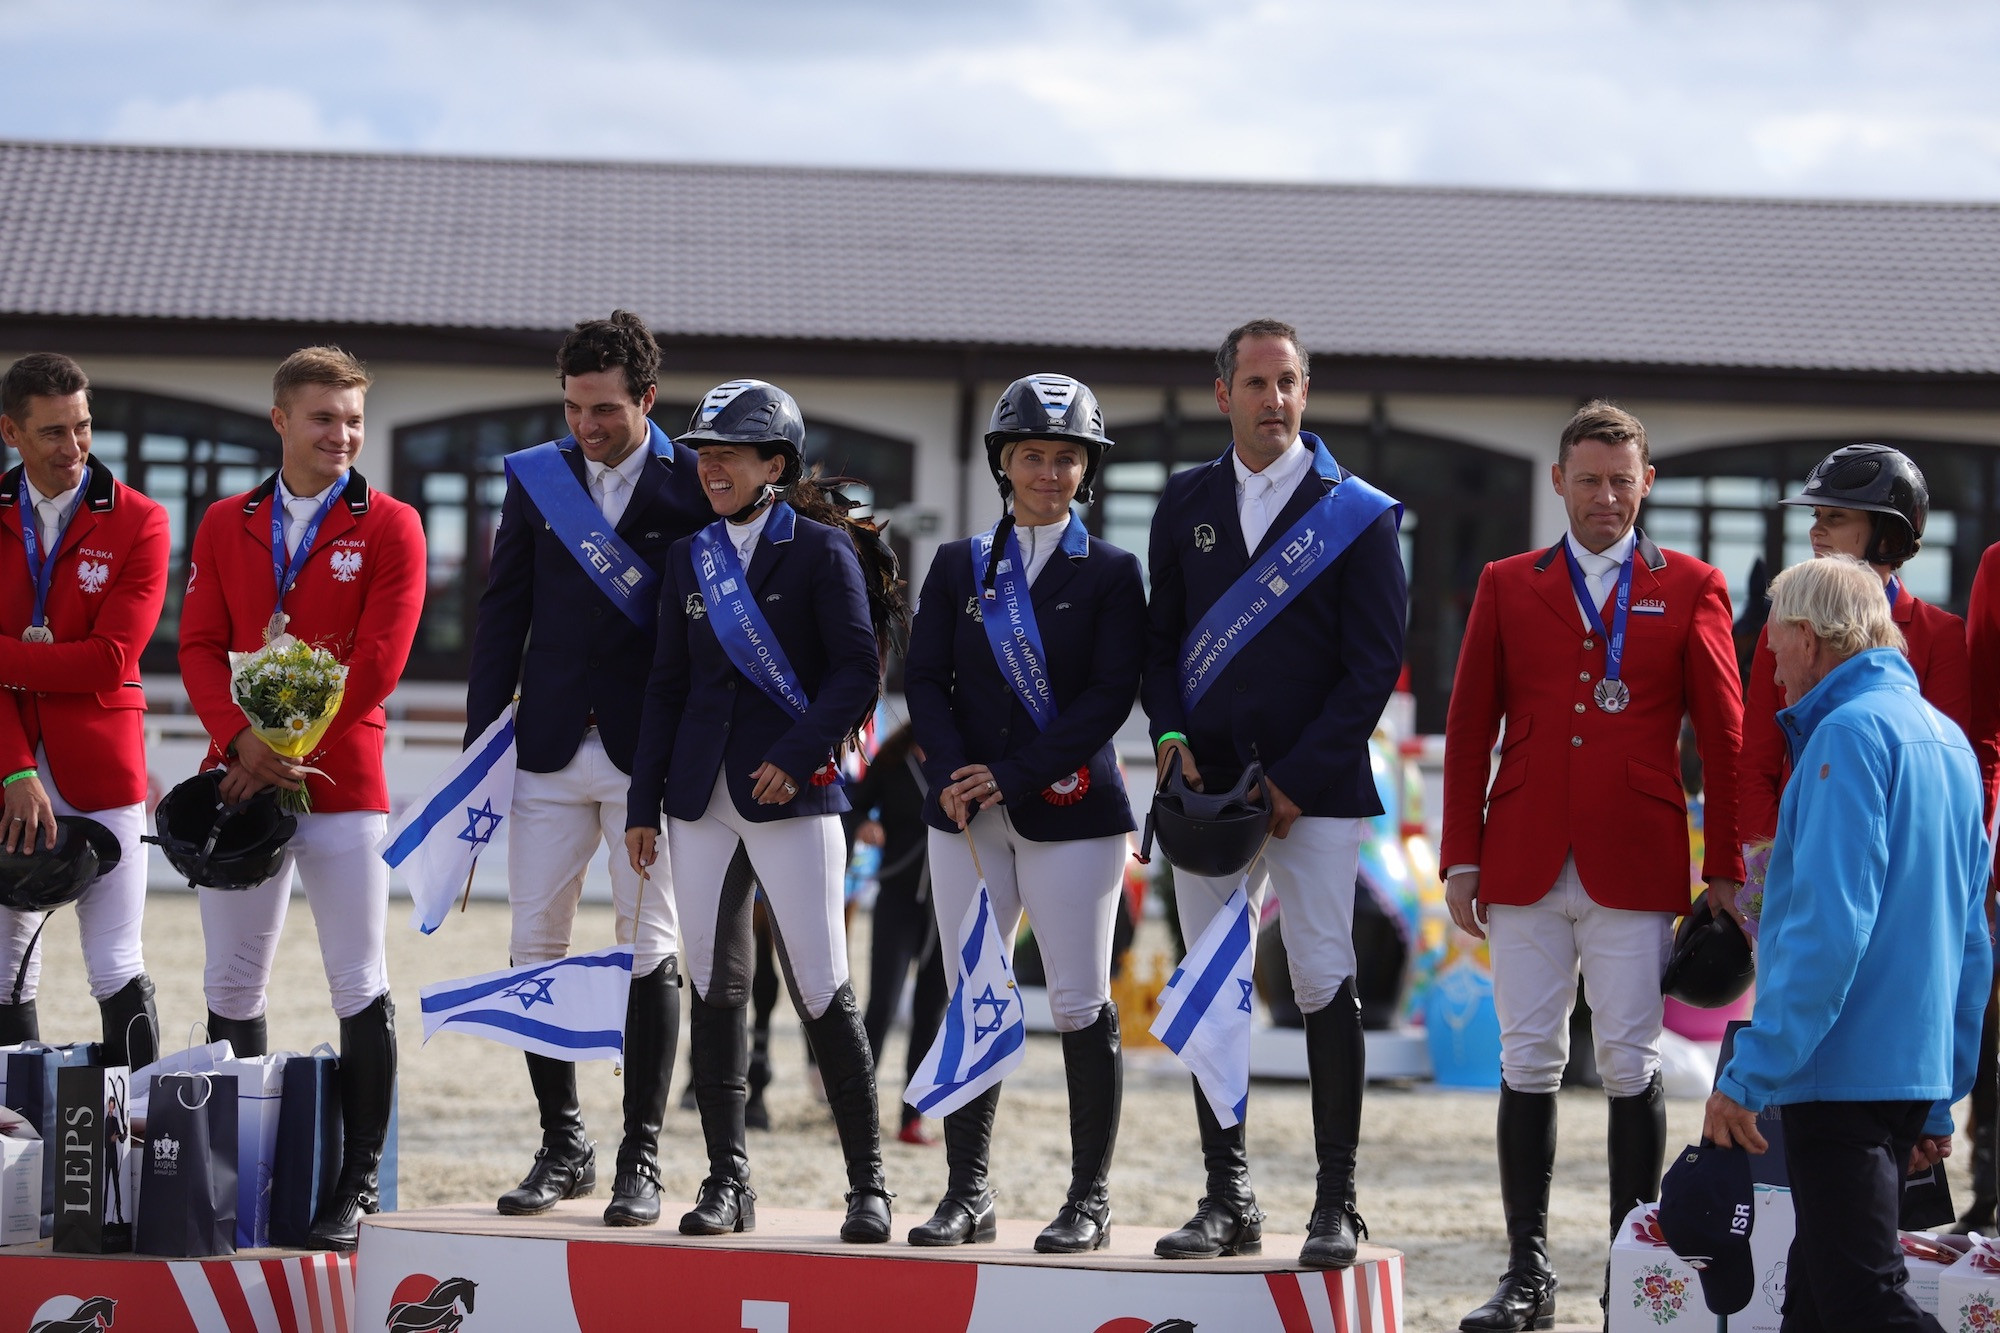 The Israeli team of, left to right, Daniel Bluman, Dani Waldman, Ashlee Bond and Elad Yaniv clinched their countries place at the Tokyo 2020 Olympic Games with victory at the Group C qualifier in Moscow ©FEI